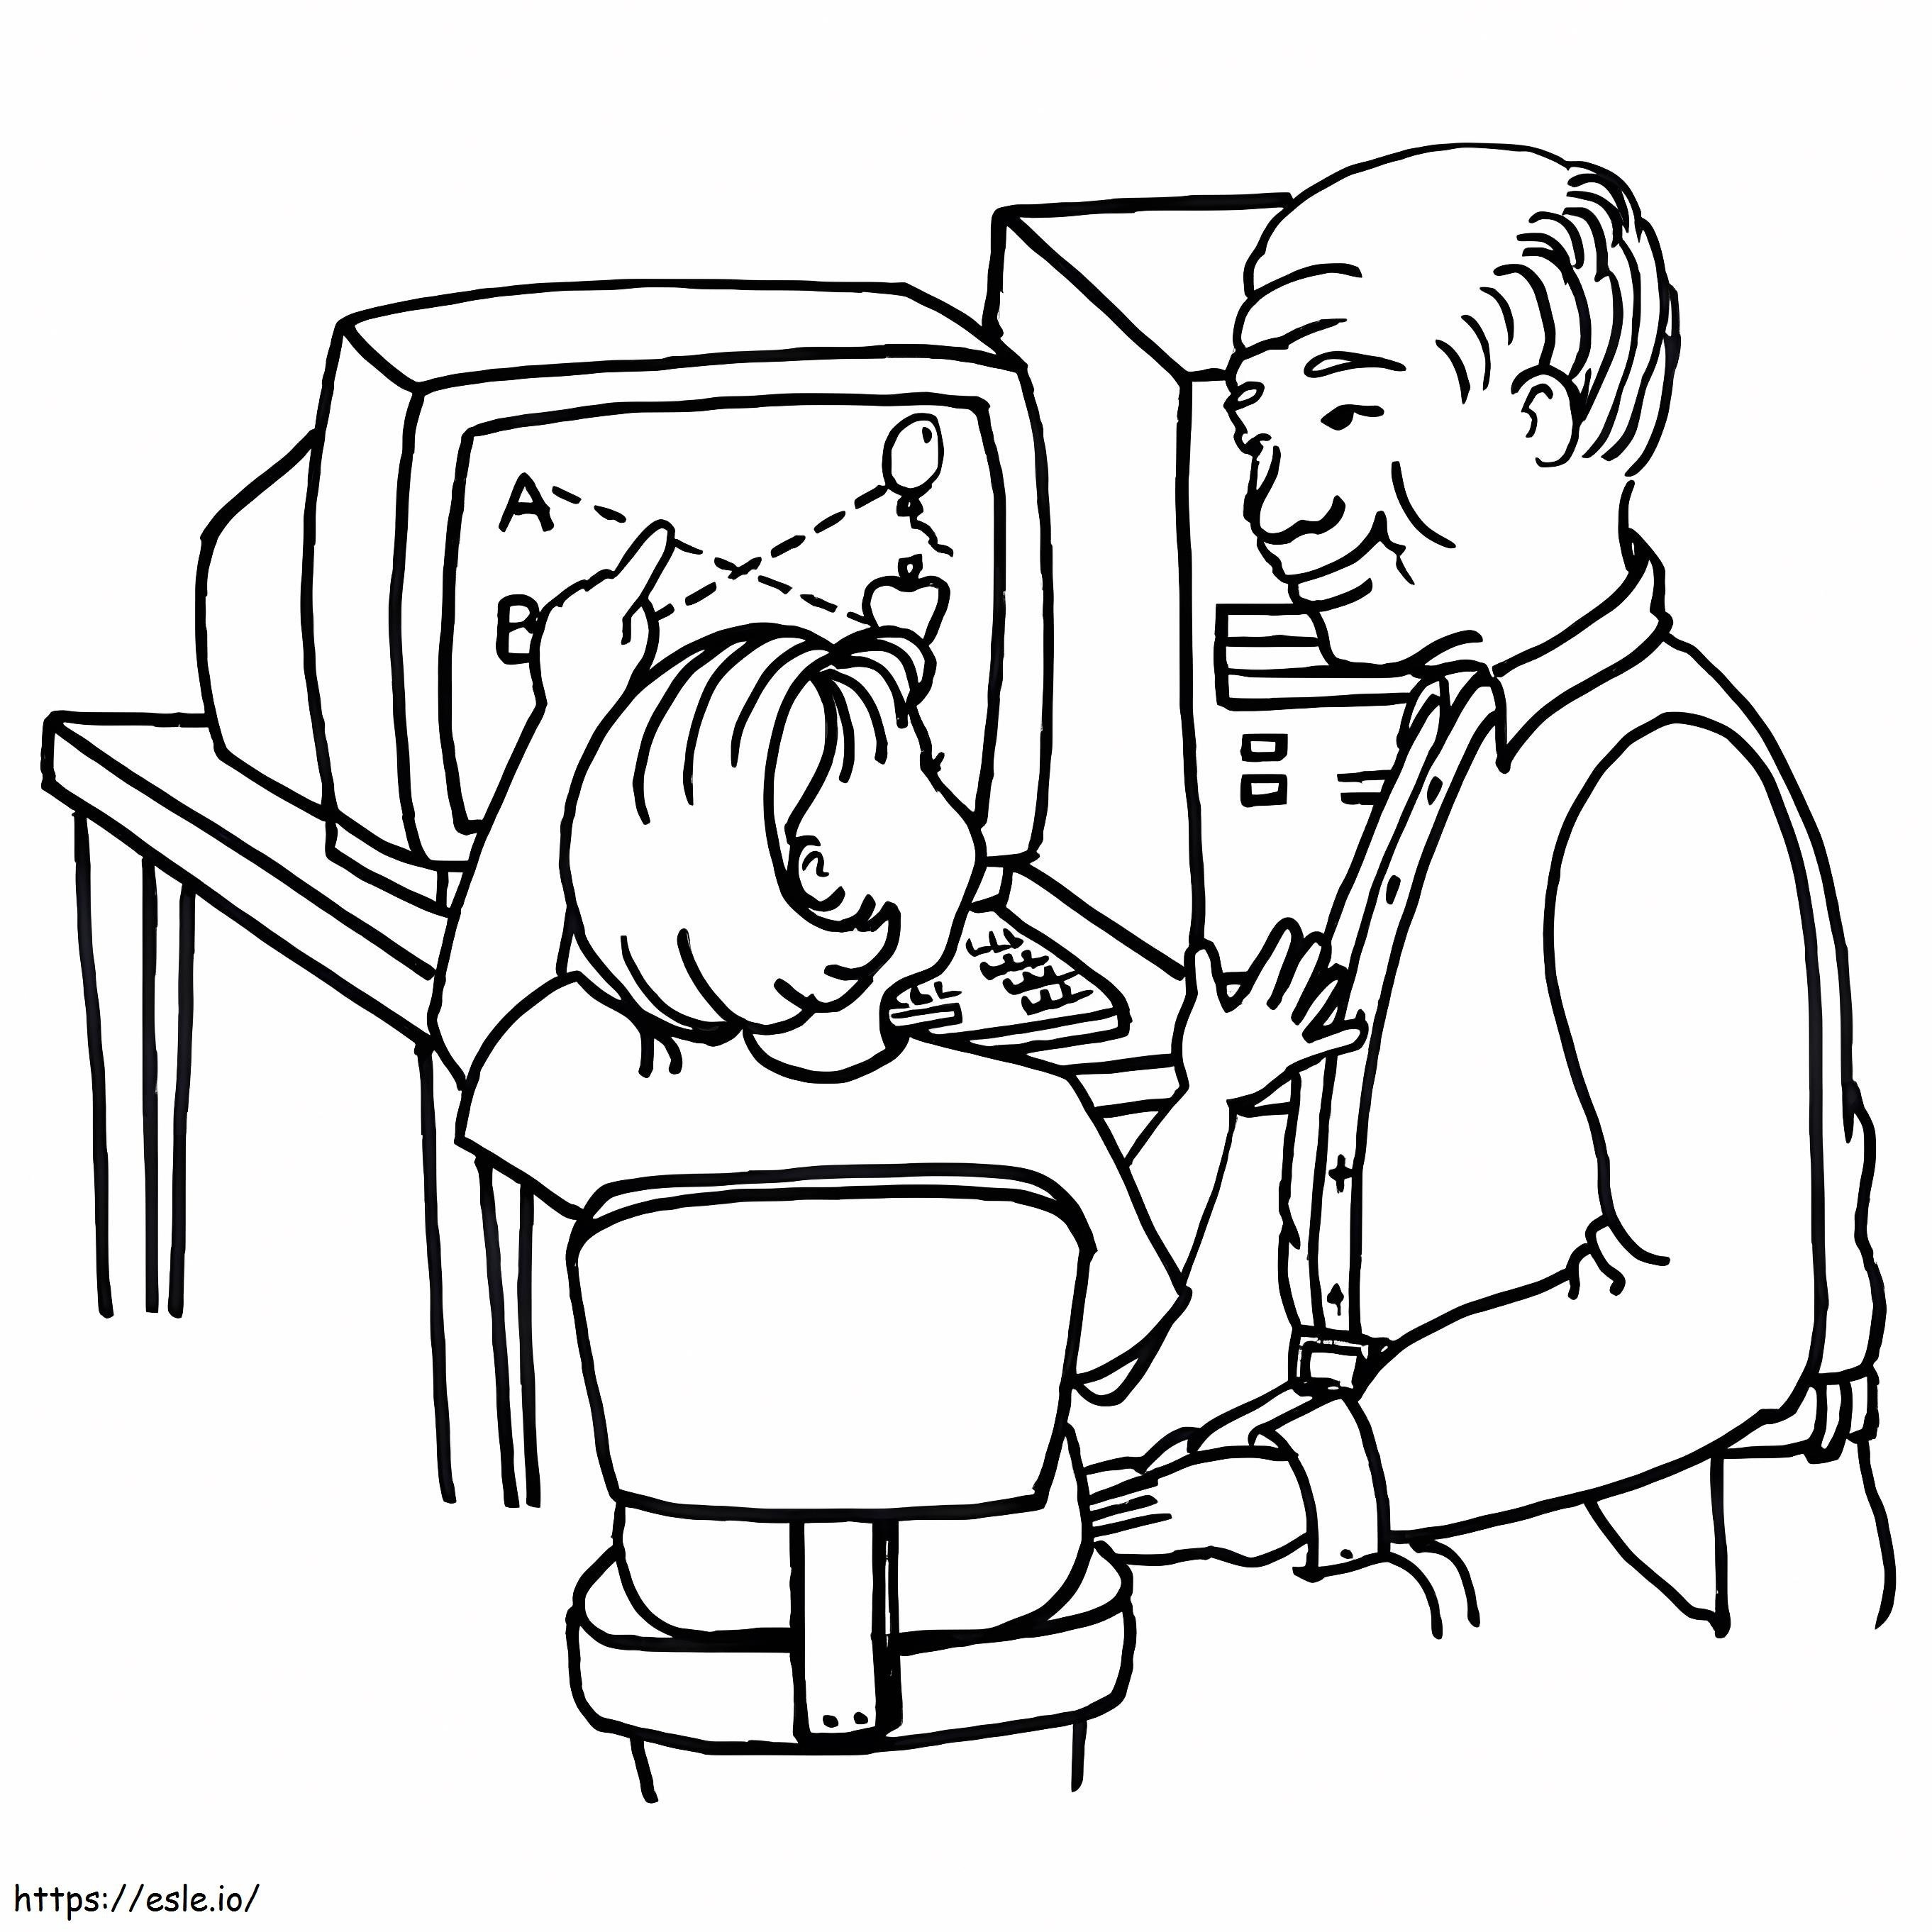 Learning On Computer coloring page